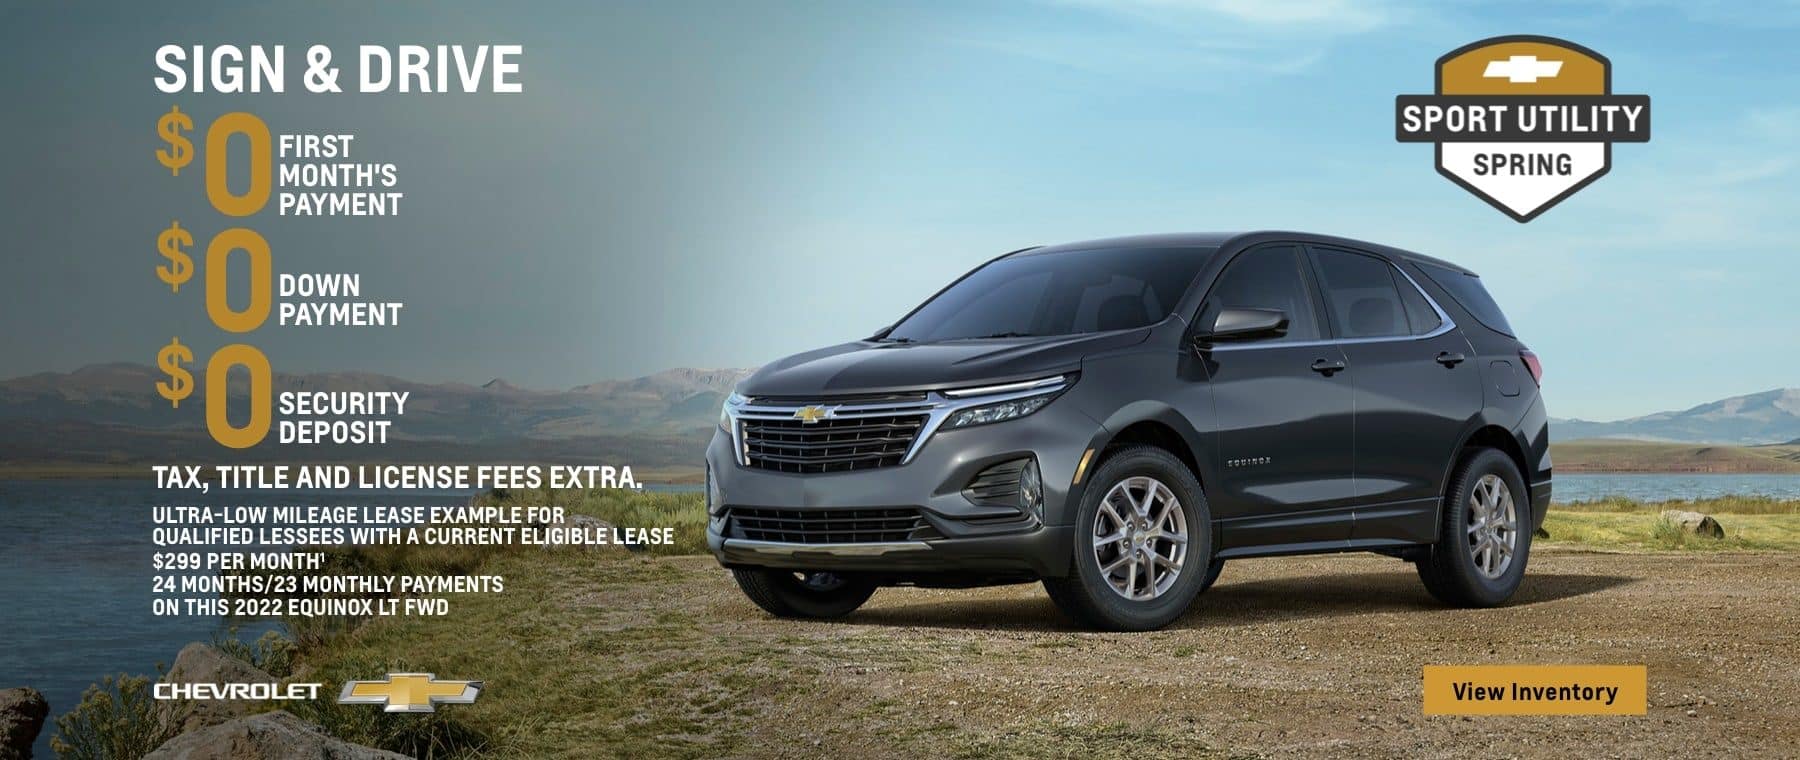 2022 Chevy Equinox LT FWD. Sign & Drive. $0 first month's payment. $0 down payment. $0 security deposit. Tax, title and license fees extra. Ultra-low mileage lease example for qualified lessees with a current eligible lease. $299 per month. 24 months/23 monthly payments on this Equinox LT FWD.